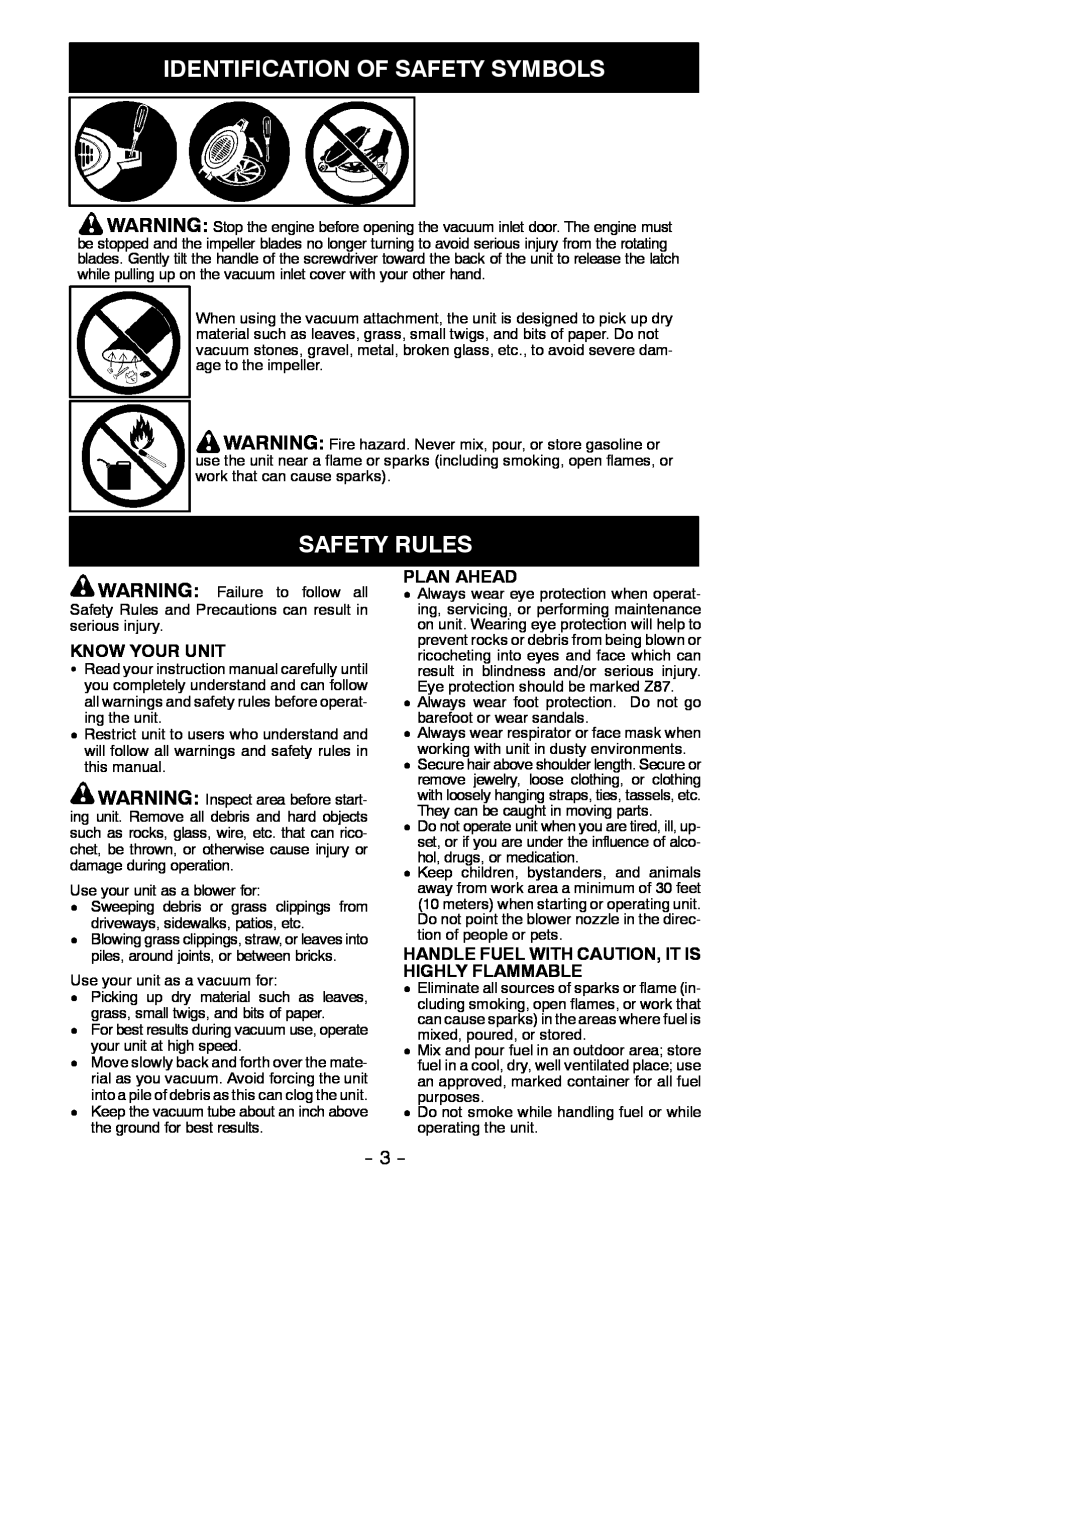 Poulan 545117517 instruction manual Safety Rules, Identification Of Safety Symbols, Know Your Unit, Plan Ahead 